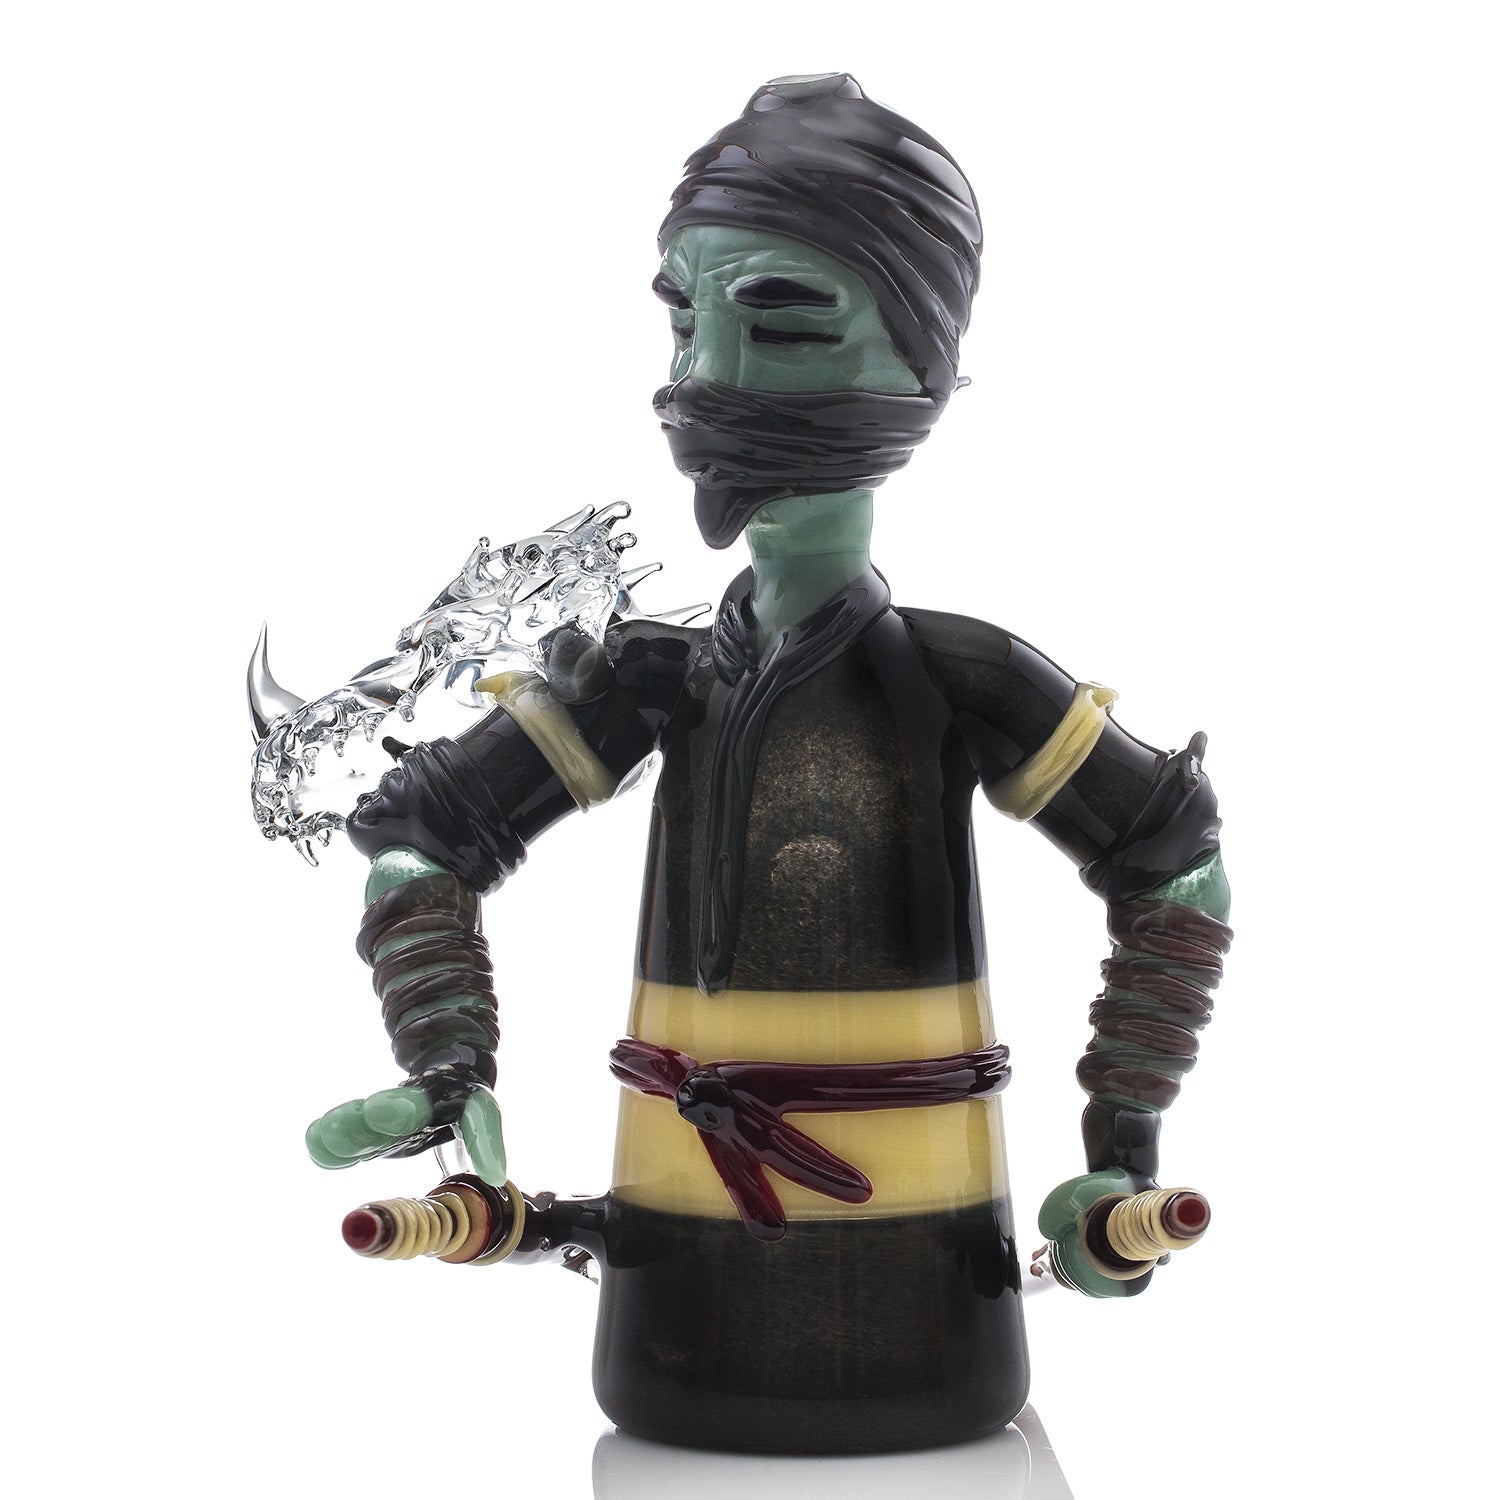 Studio Photo of the Alien Ninja Warrior Heady glass piece made by R3G15, ninja has two swords in sheaths at hip and clear animal skull armor on his right shoulder. 